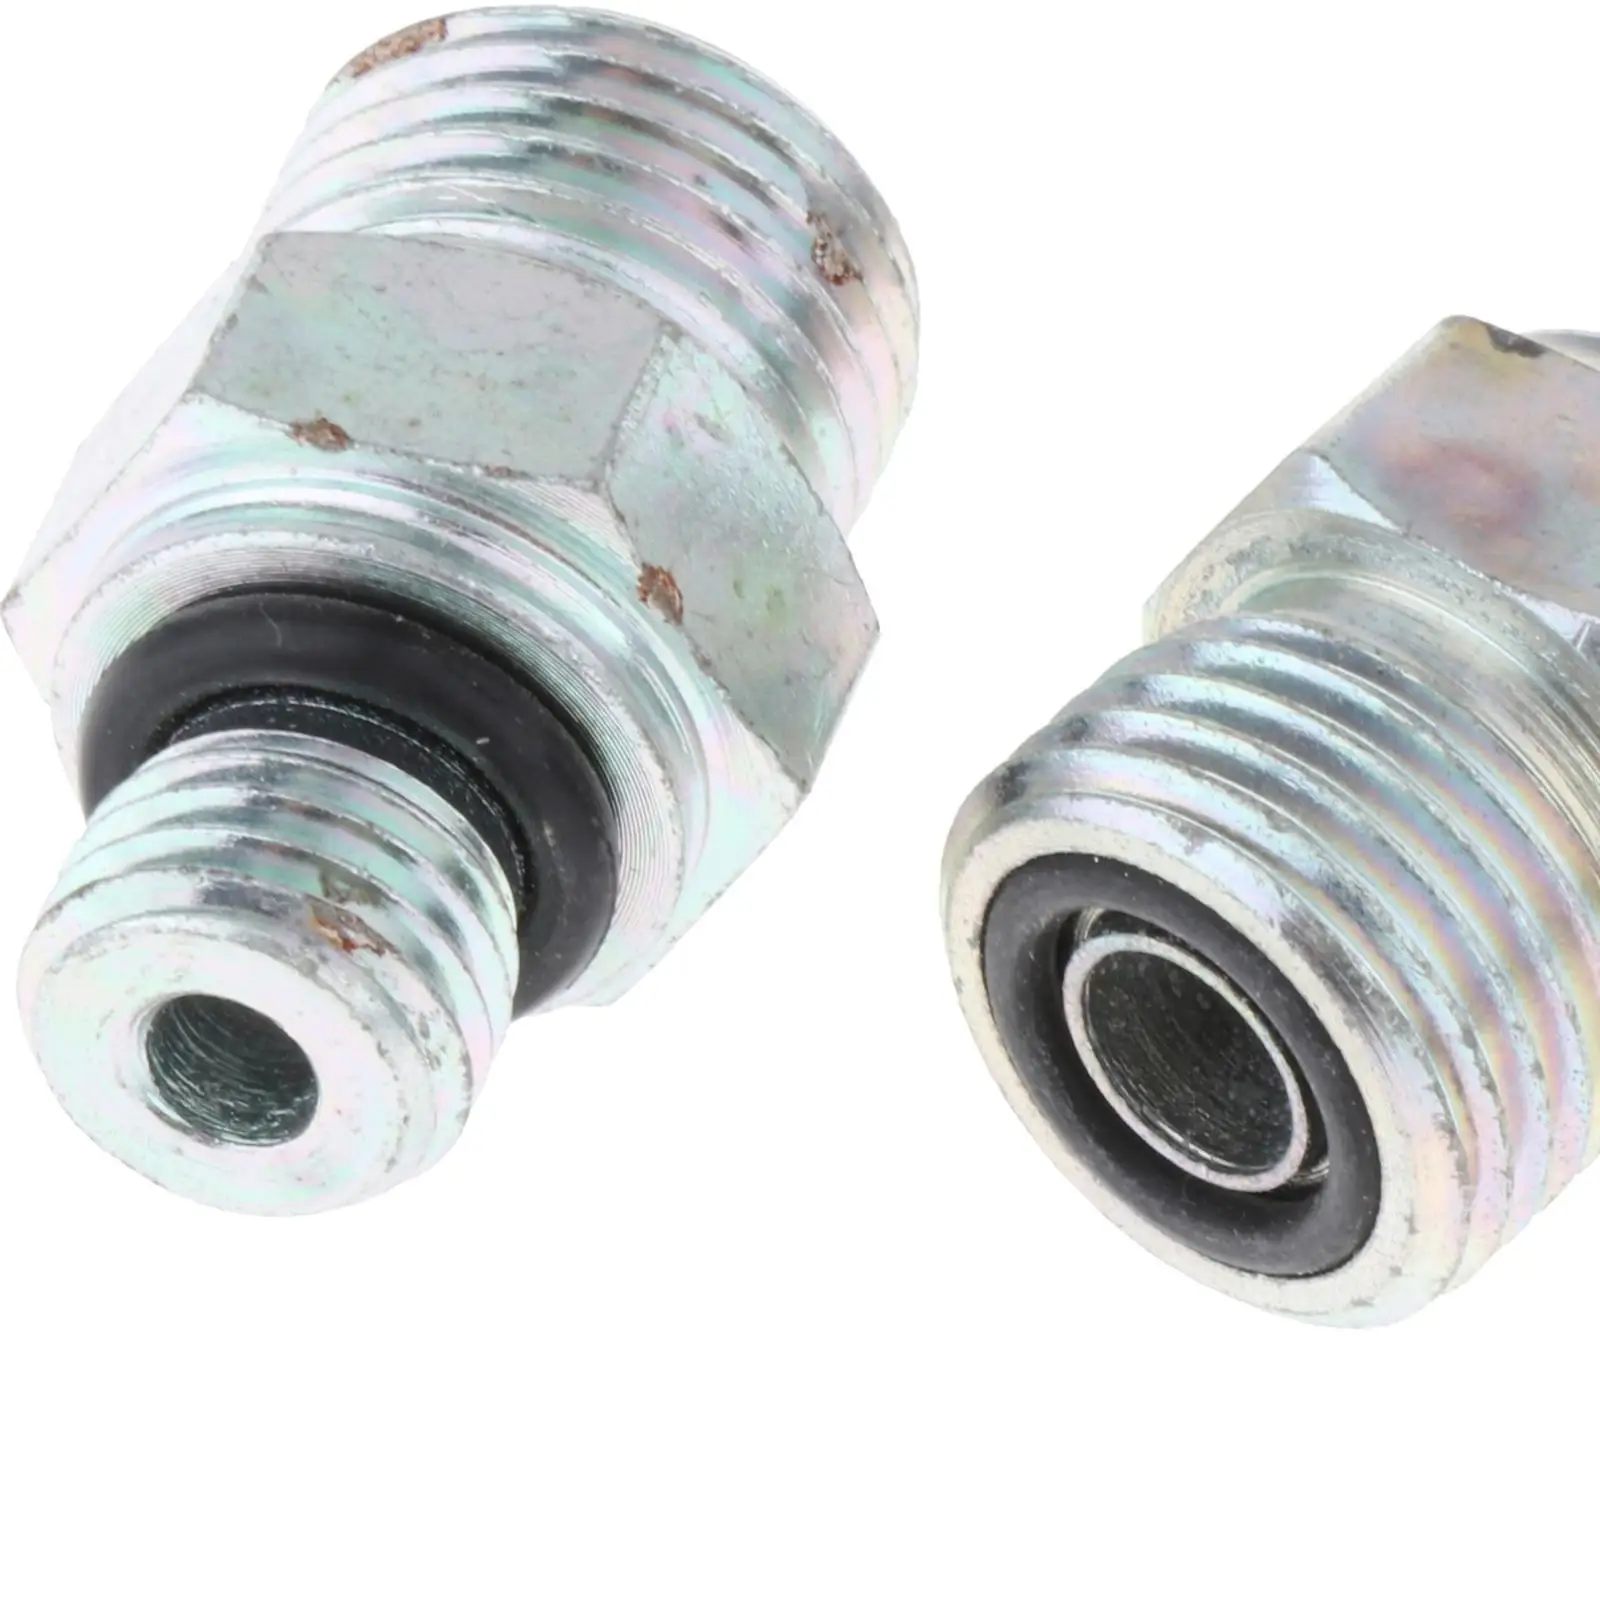 2x Replacement turbo oil feed Line Parts Iron Accessories Hardware Turbo Oil